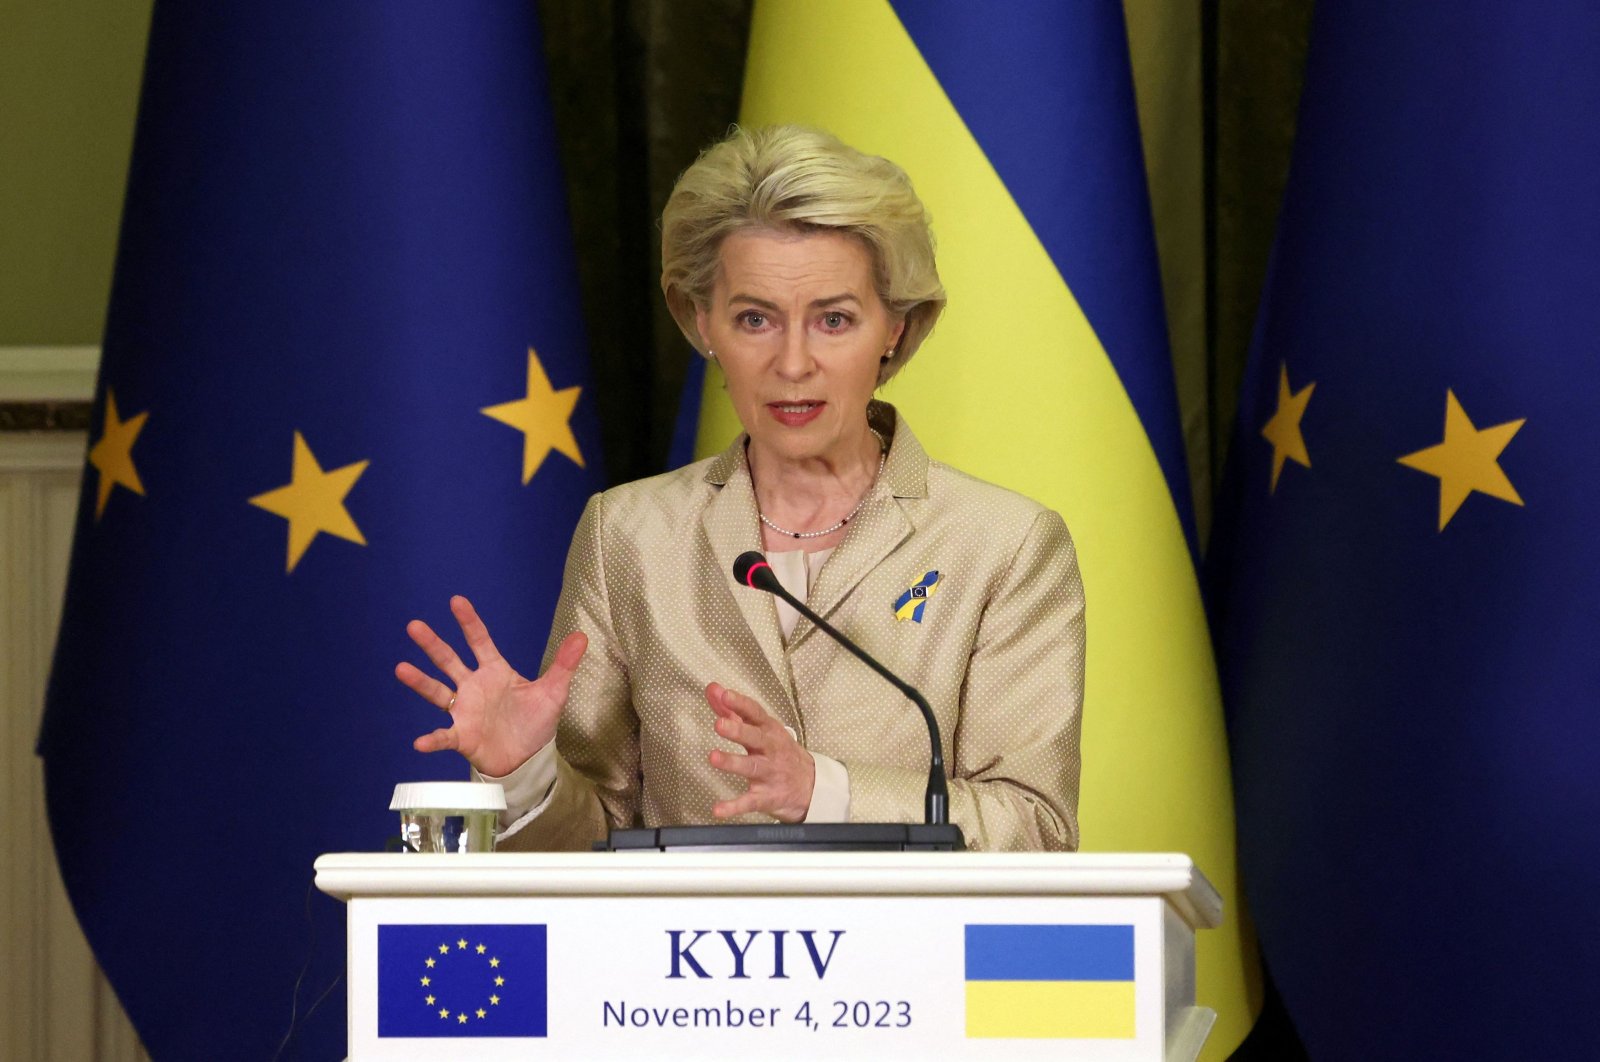 European Commission President Ursula von der Leyen speaks during a joint news conference with Ukraine&#039;s President following their talks in Kyiv on Nov. 4, 2023. (AFP Photo)